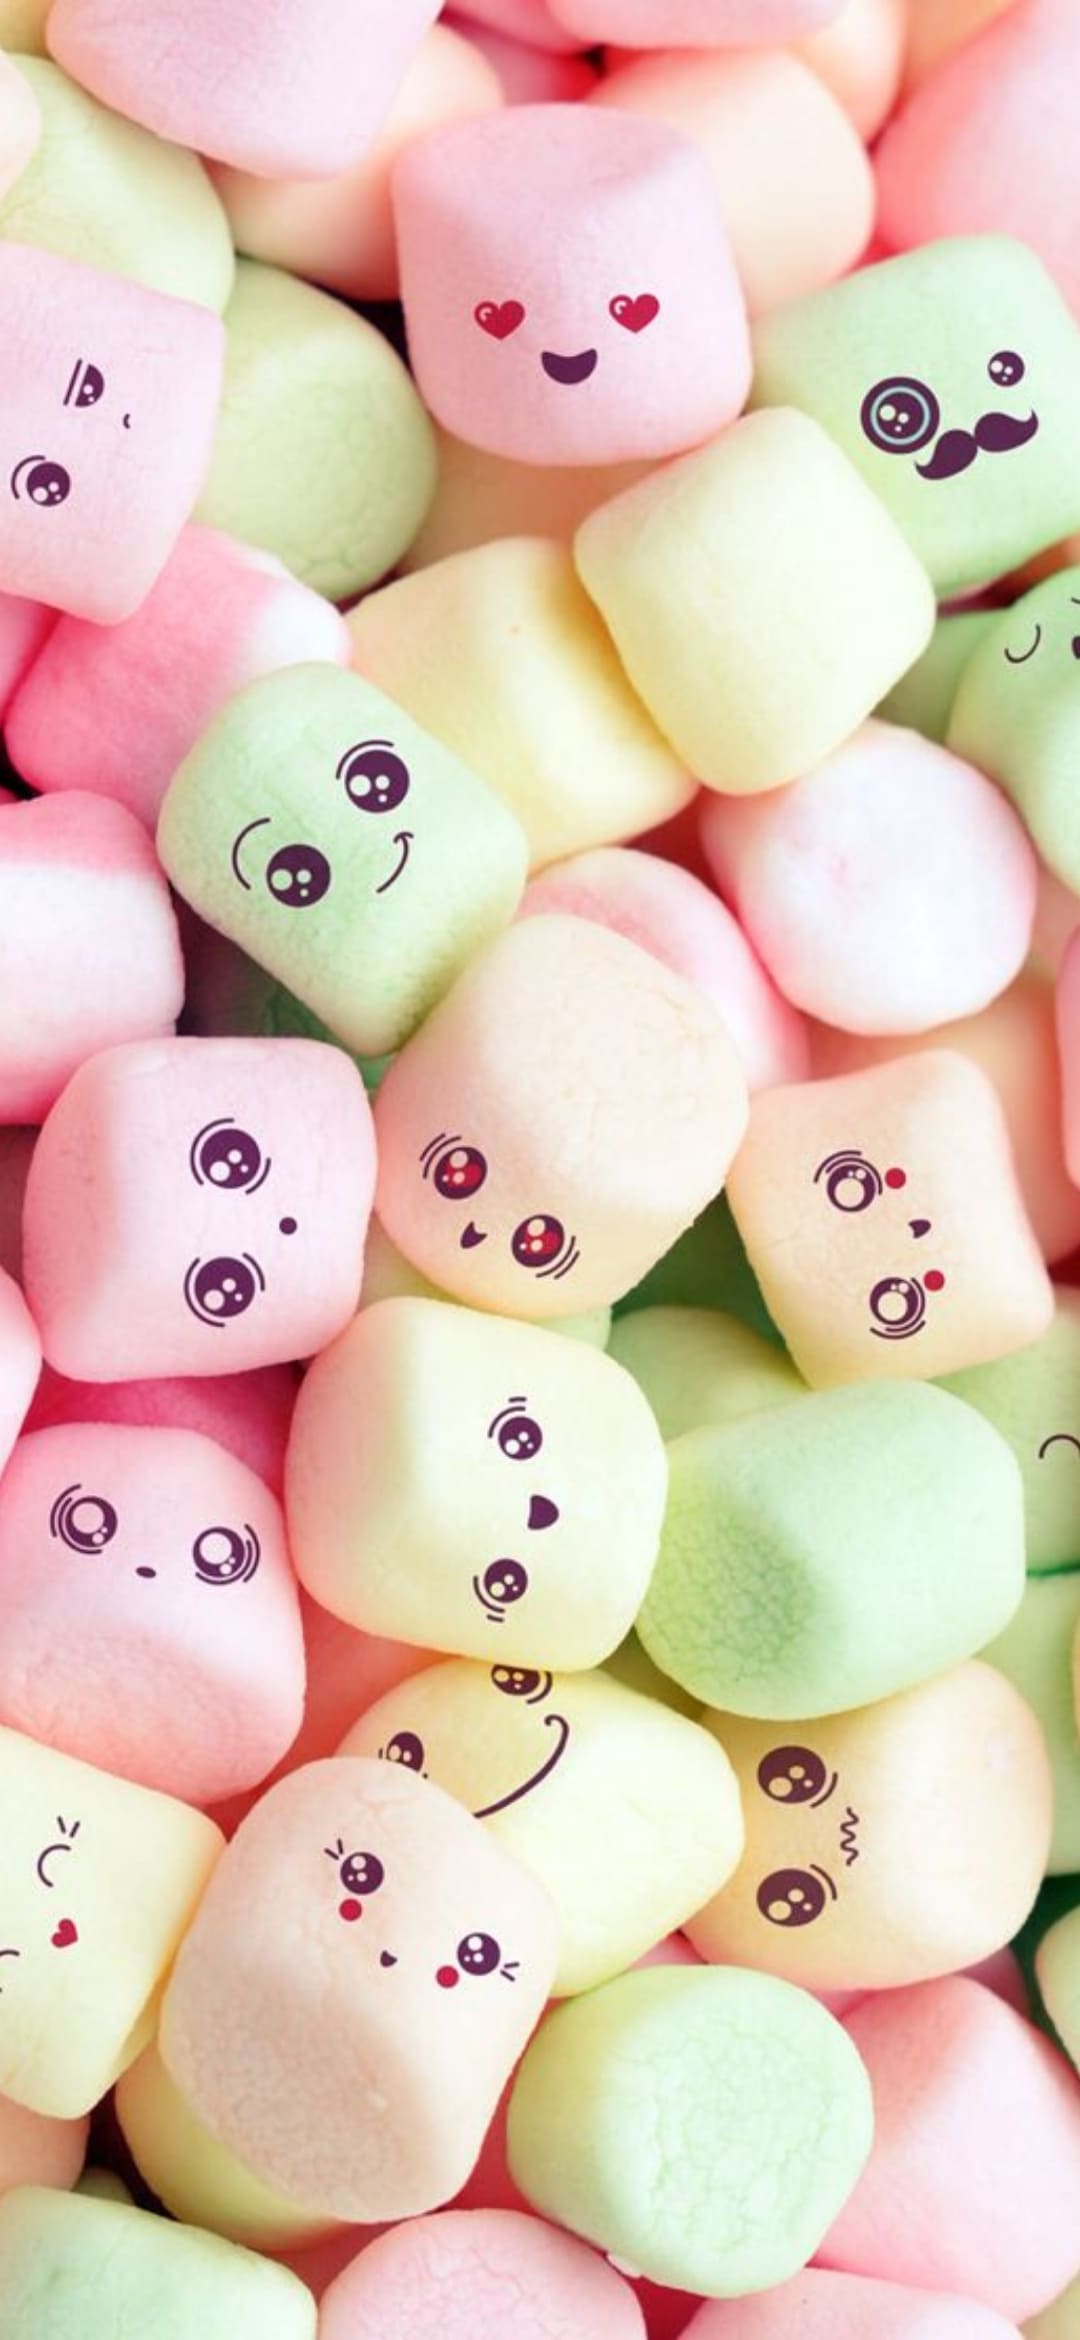 A pile of candy with faces on them - IPhone, cute, marshmallows